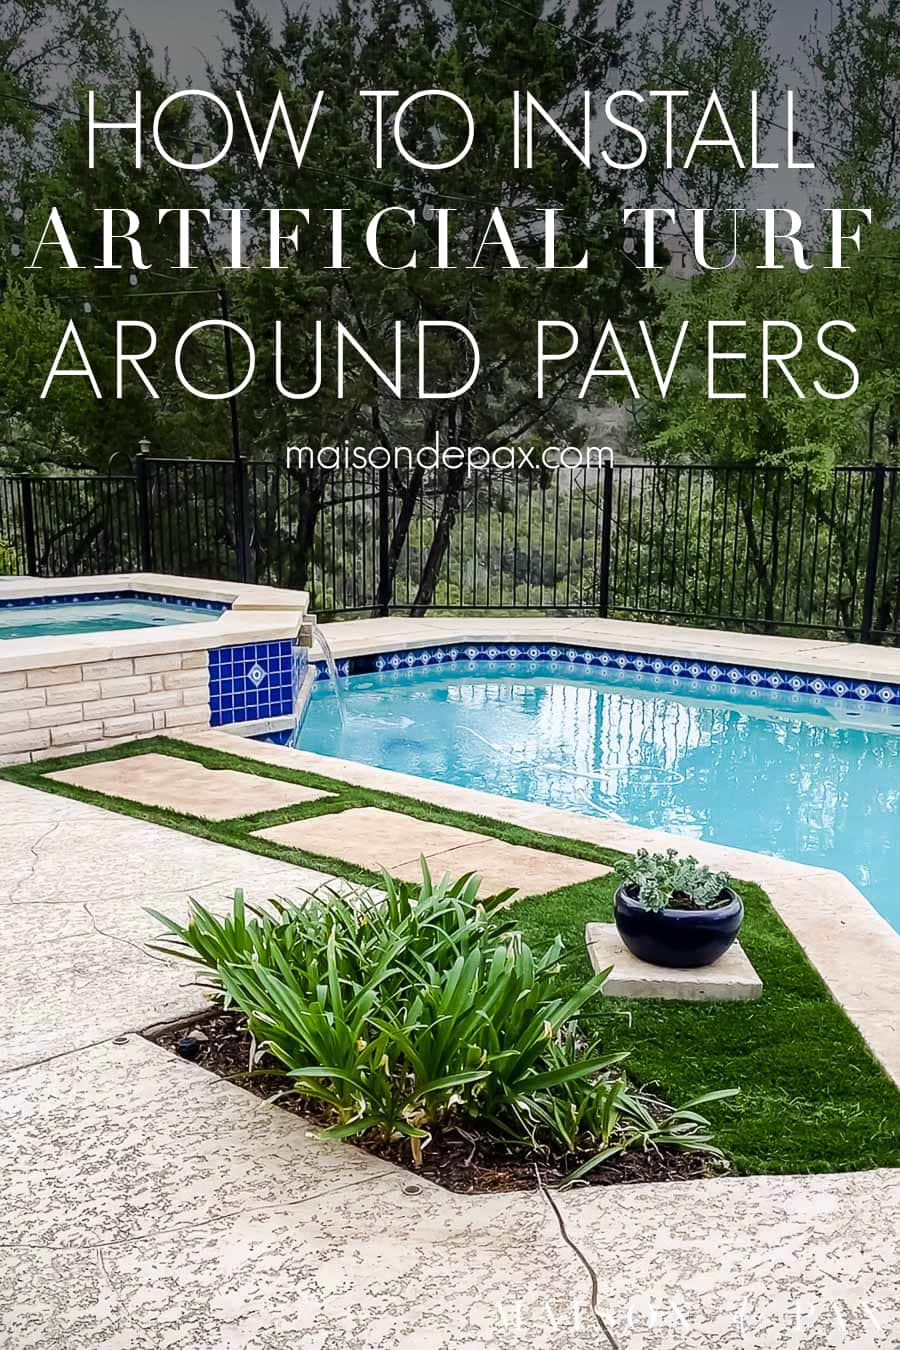 how to install artificial turf around pavers